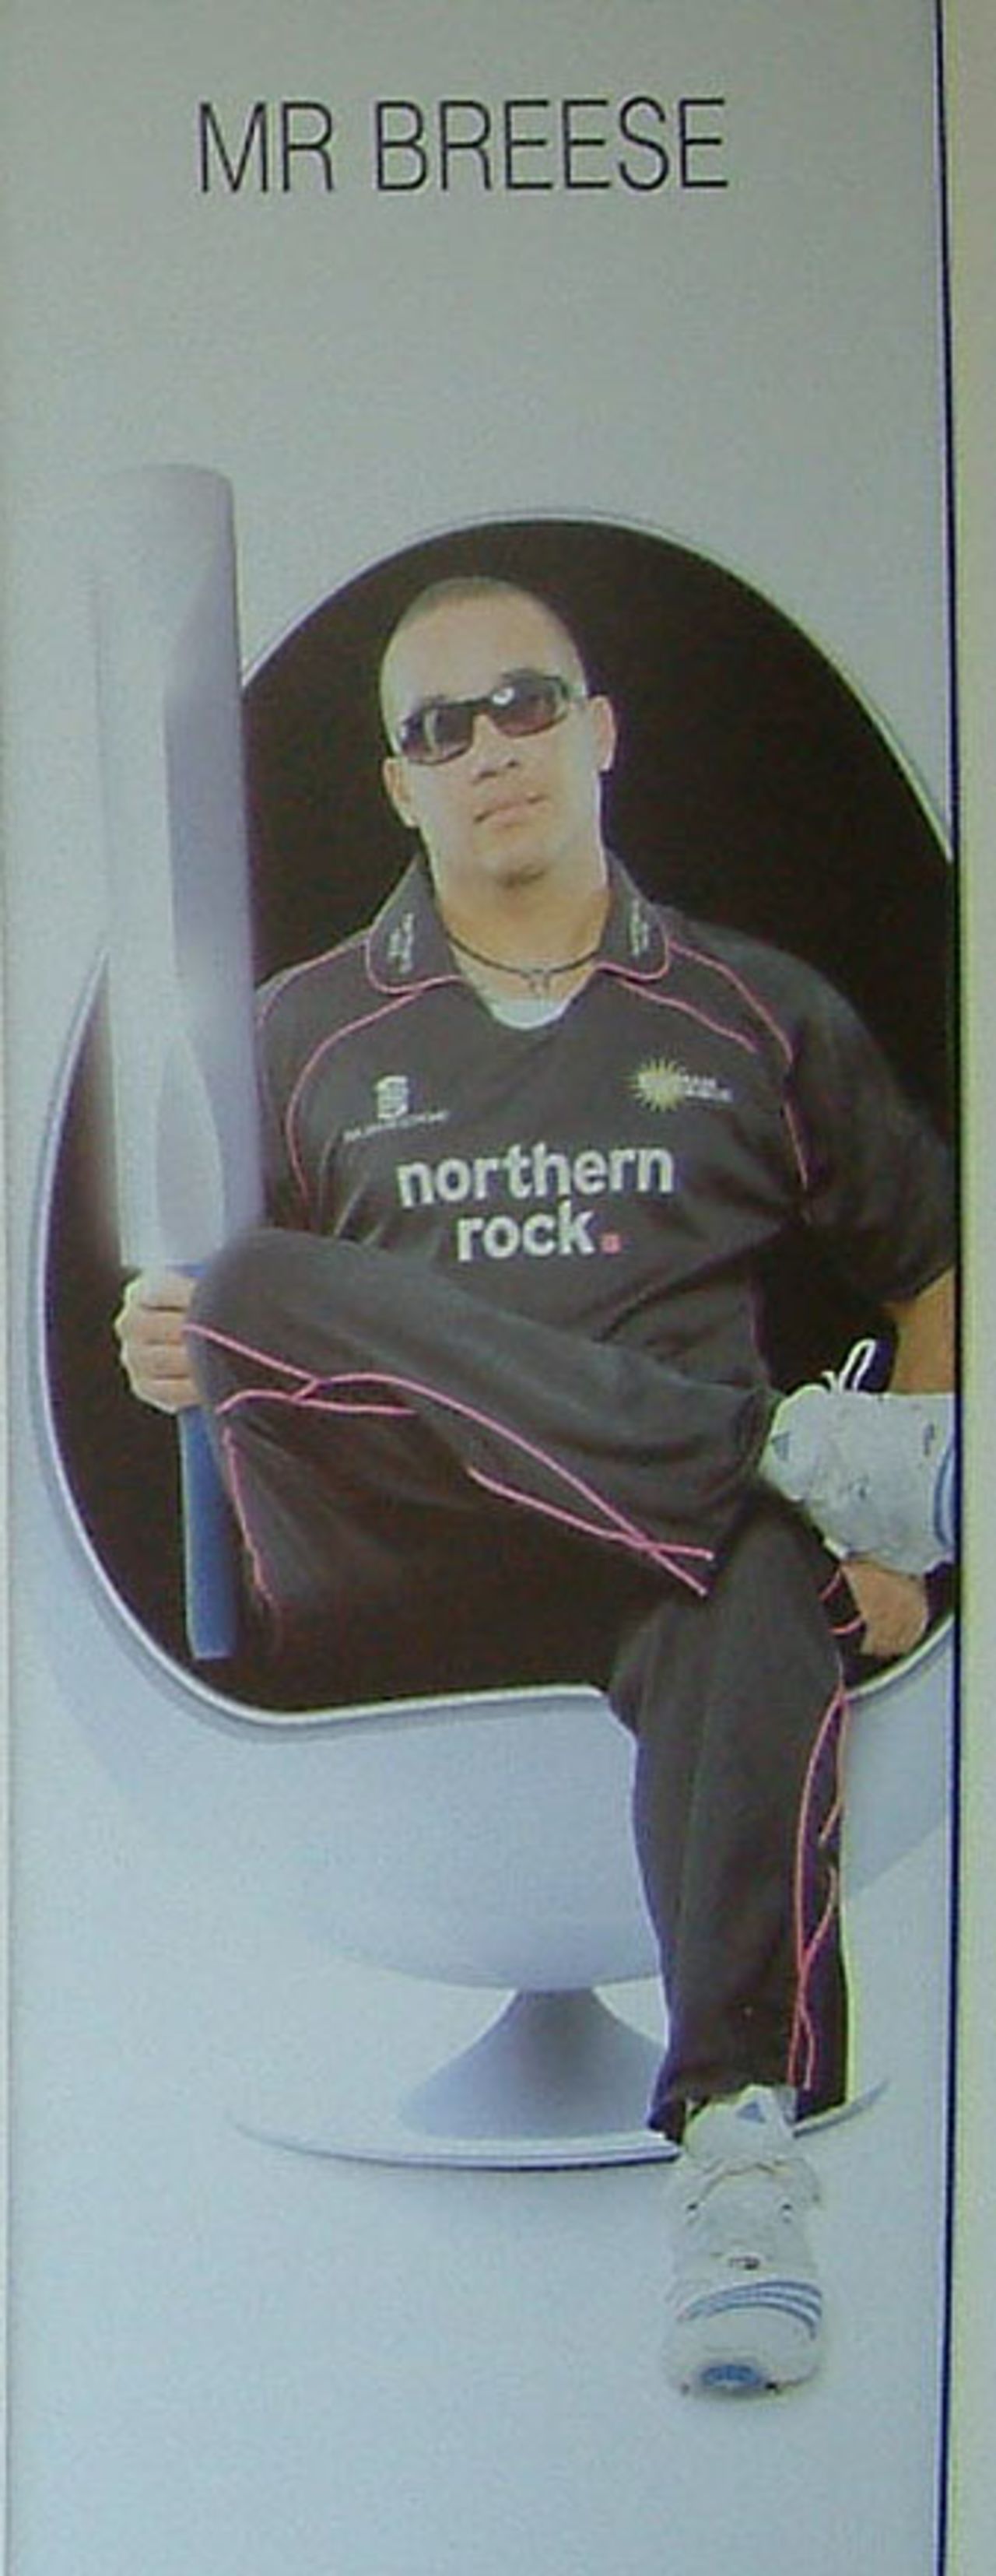 Durham's Twenty20 Cup campaign - "Men in Black" - featuring Gareth Breese, May, 2008